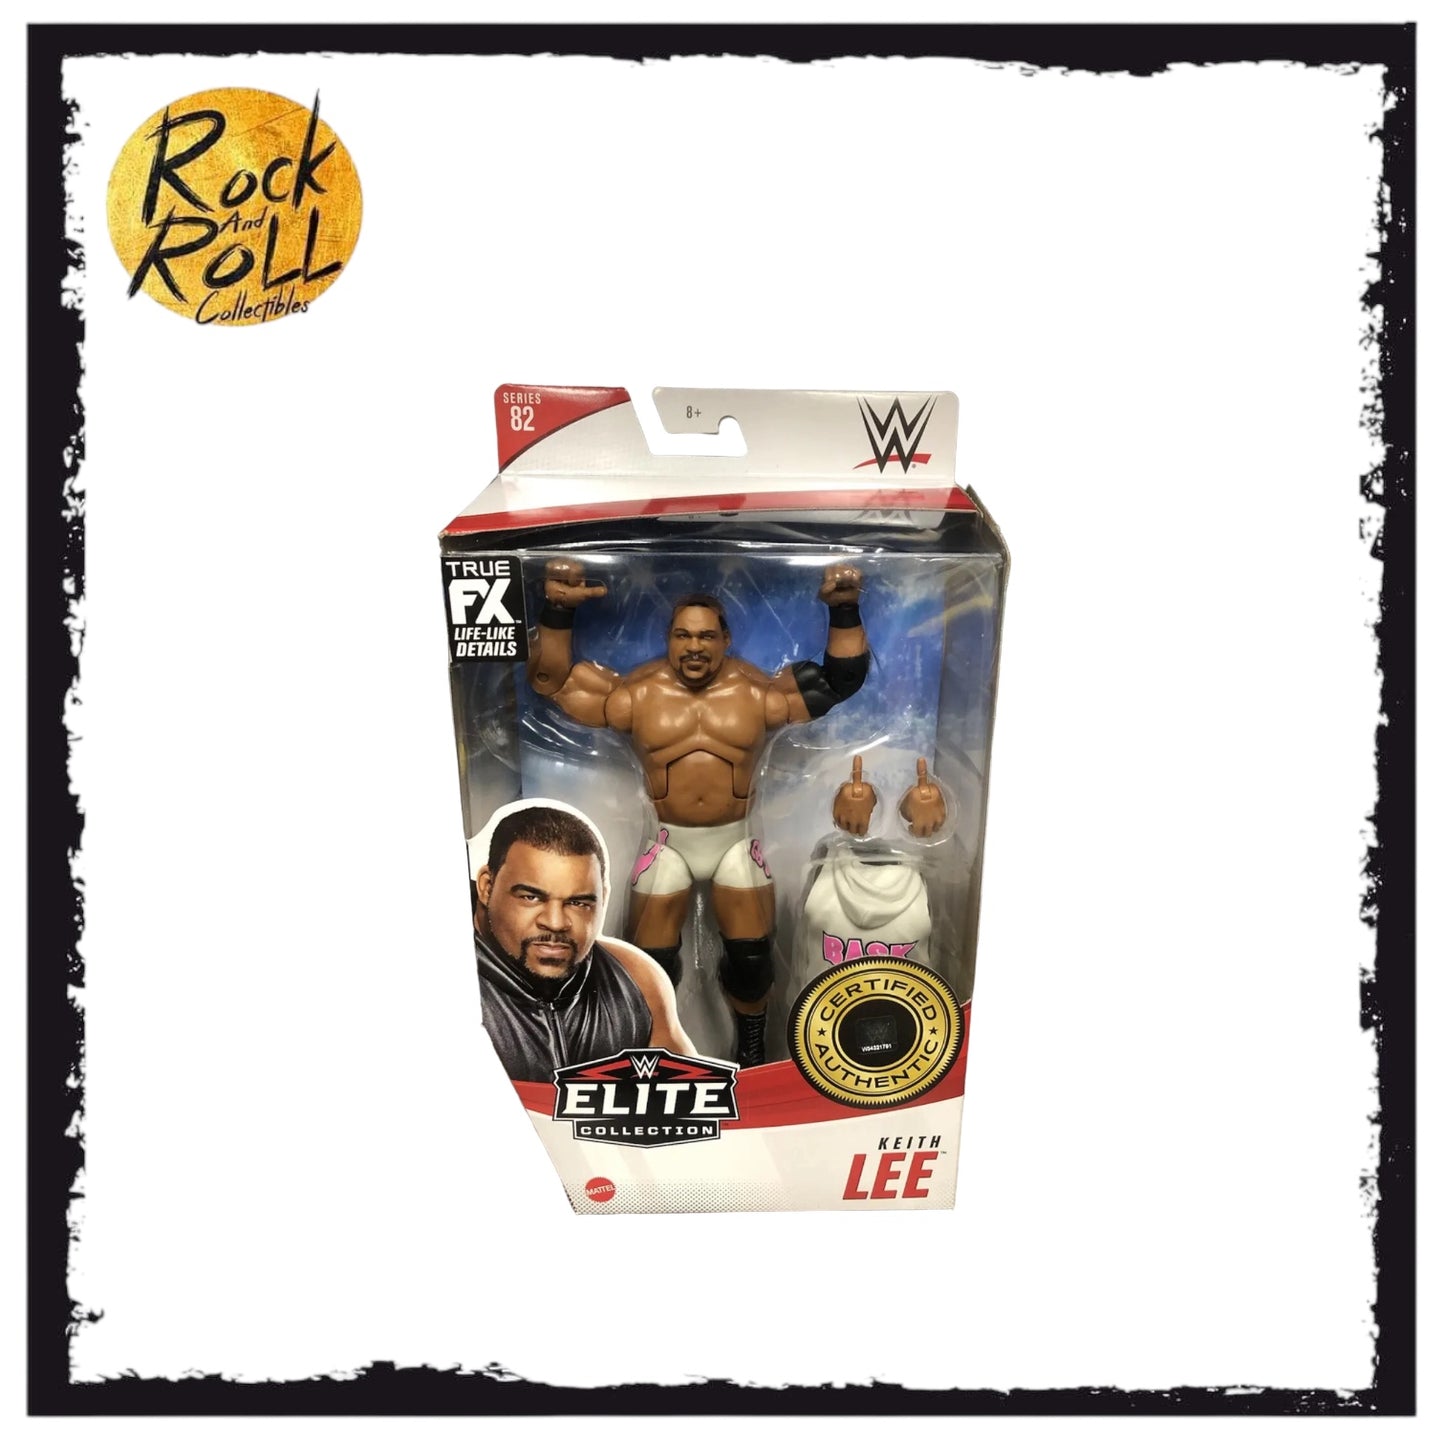 Not Mint Packaging Keith Lee Chase Elite 82 US Import